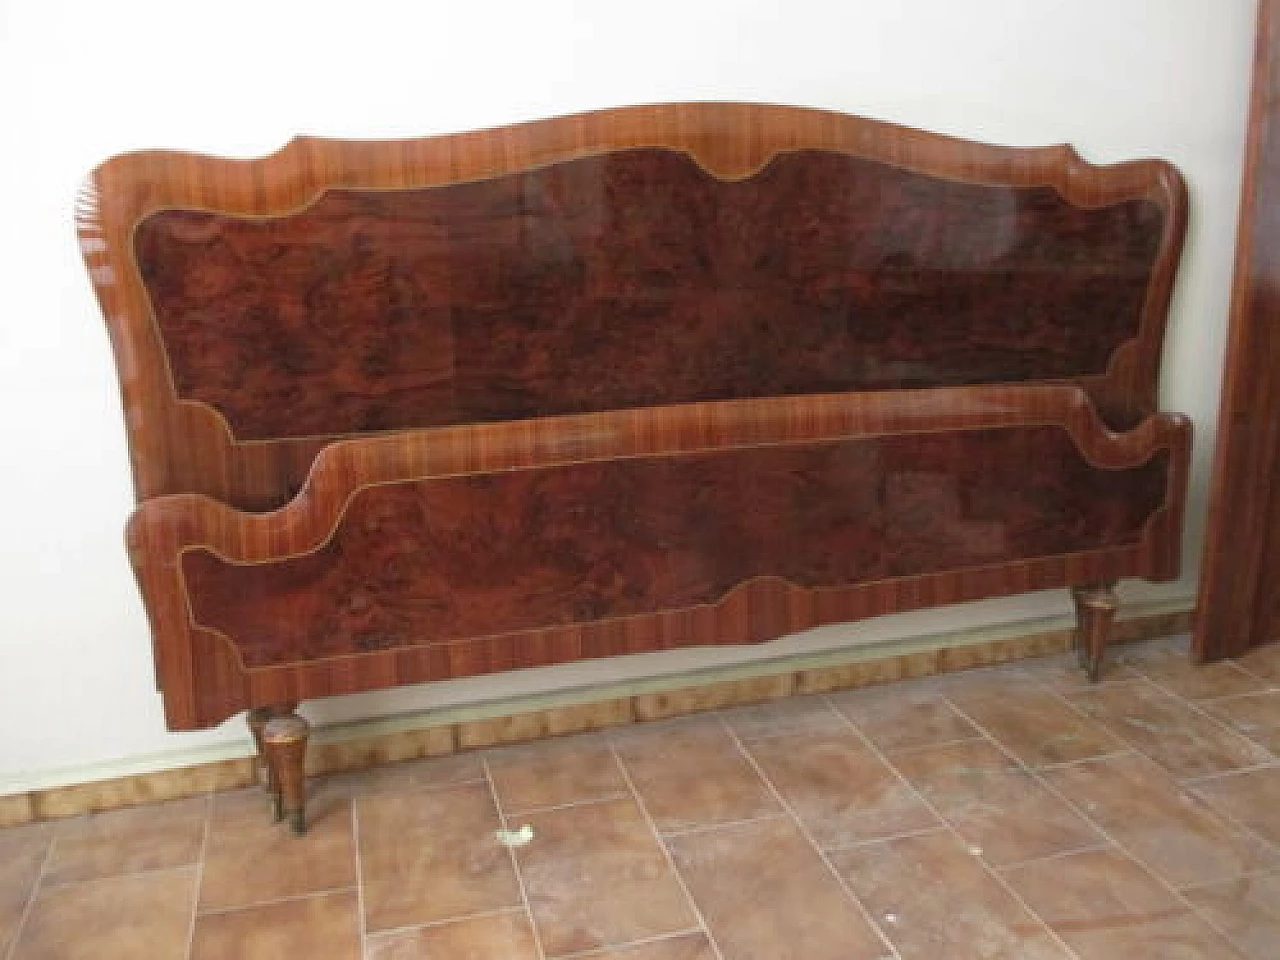 Rosewood double bed with inlays, 1950s 1330778